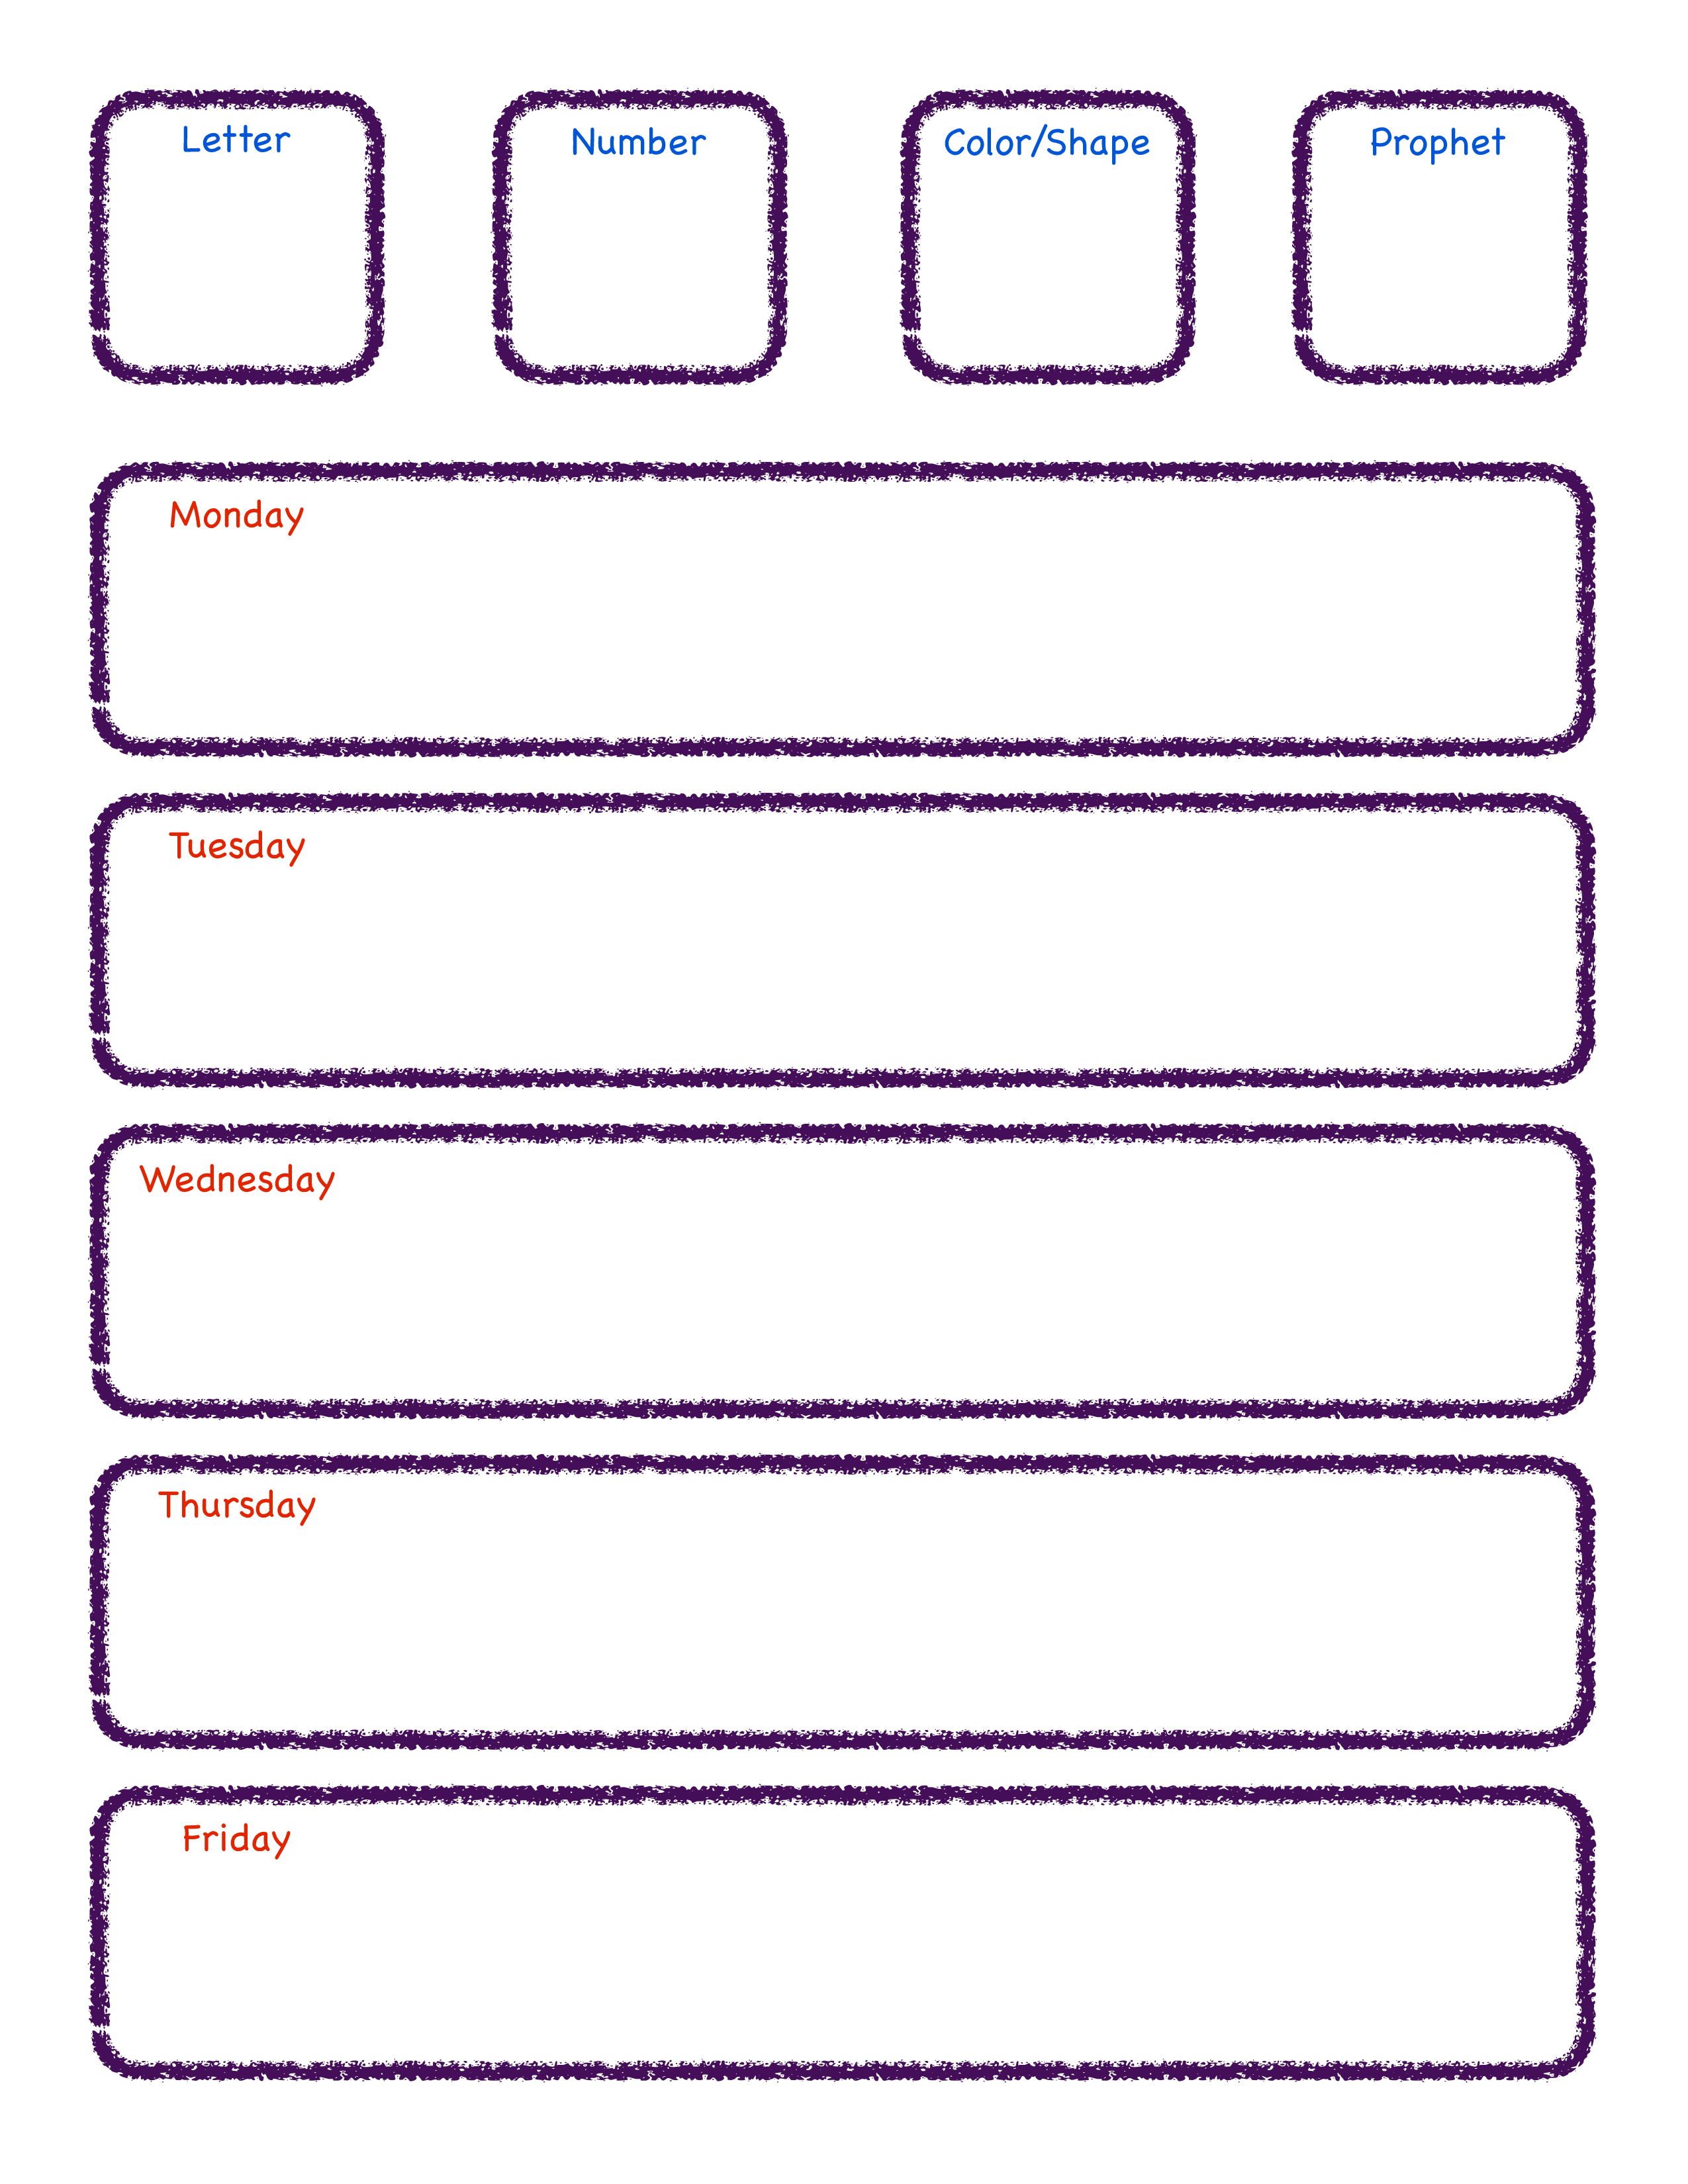 printable-weekly-lesson-plan-template